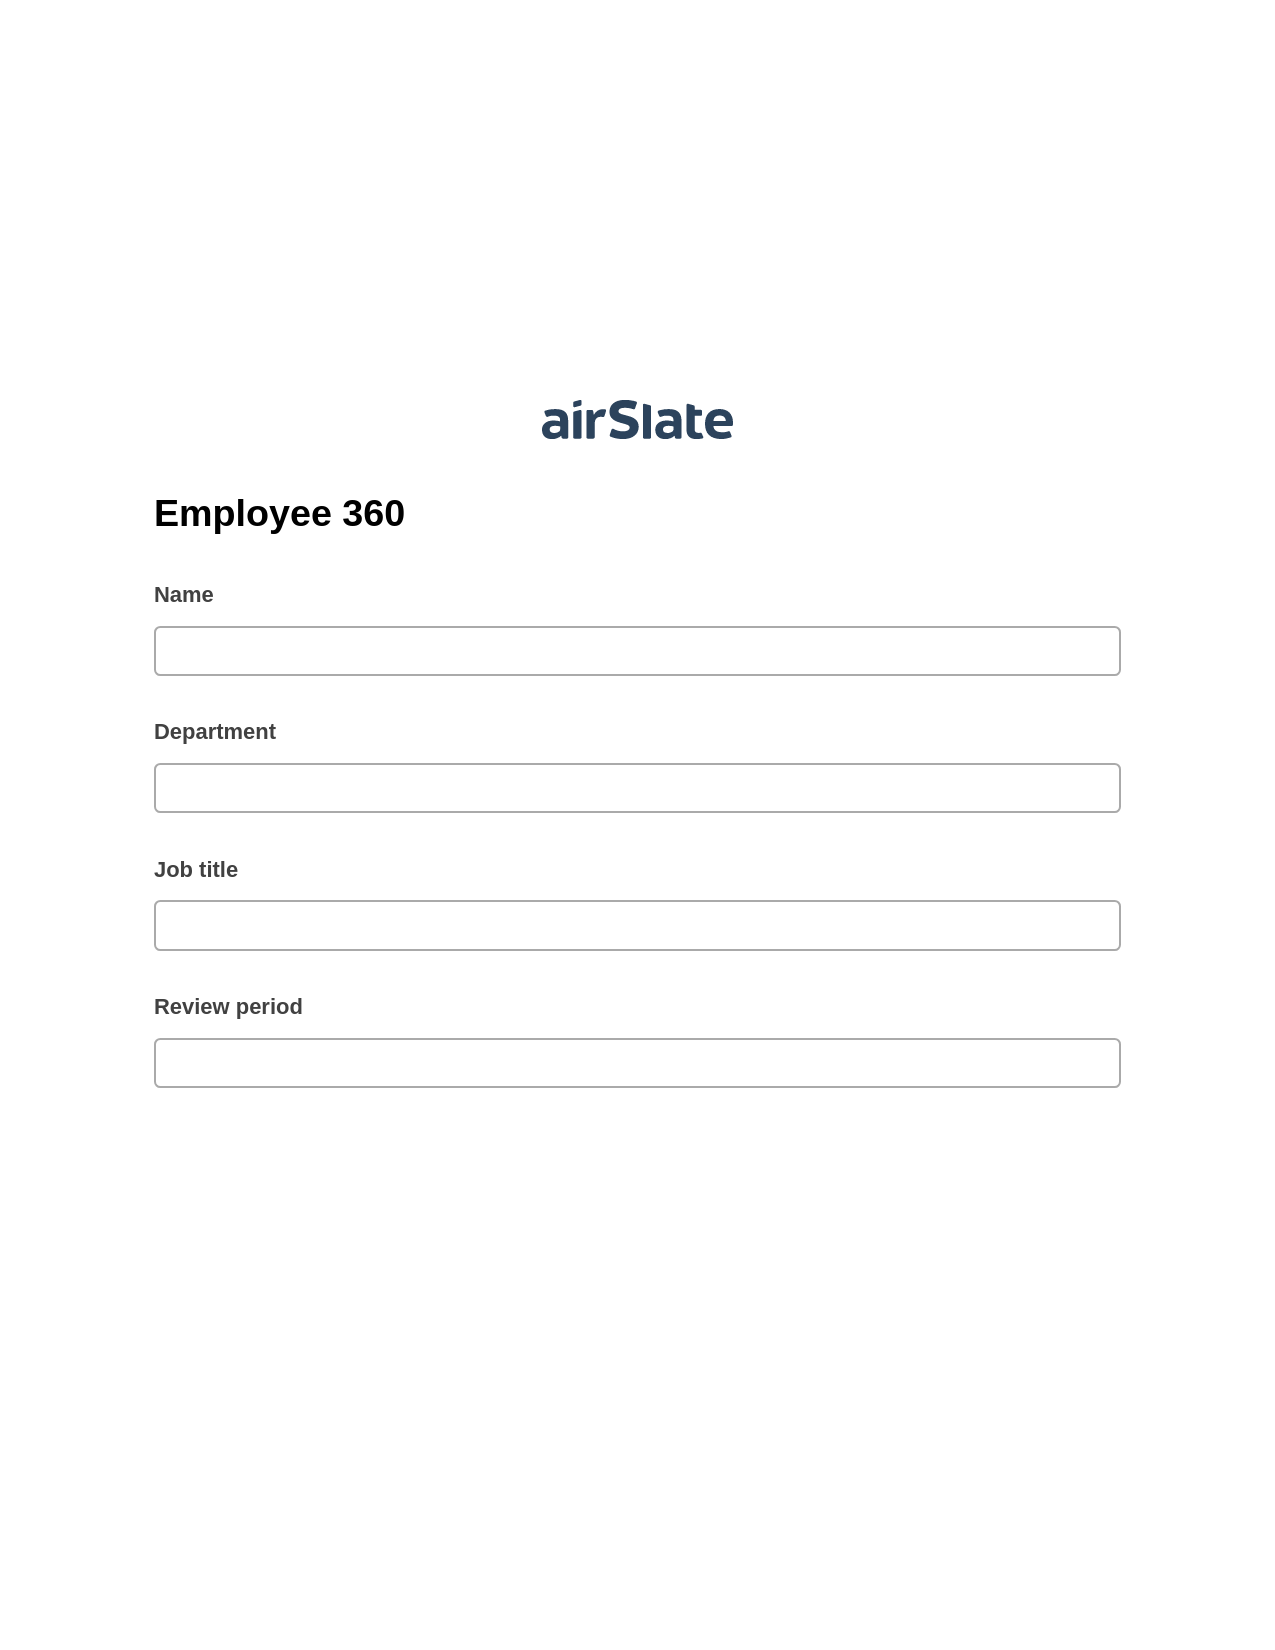 Employee 360 Pre-fill from Salesforce Records with SOQL Bot, Invoke Salesforce Process Bot, Export to Excel 365 Bot